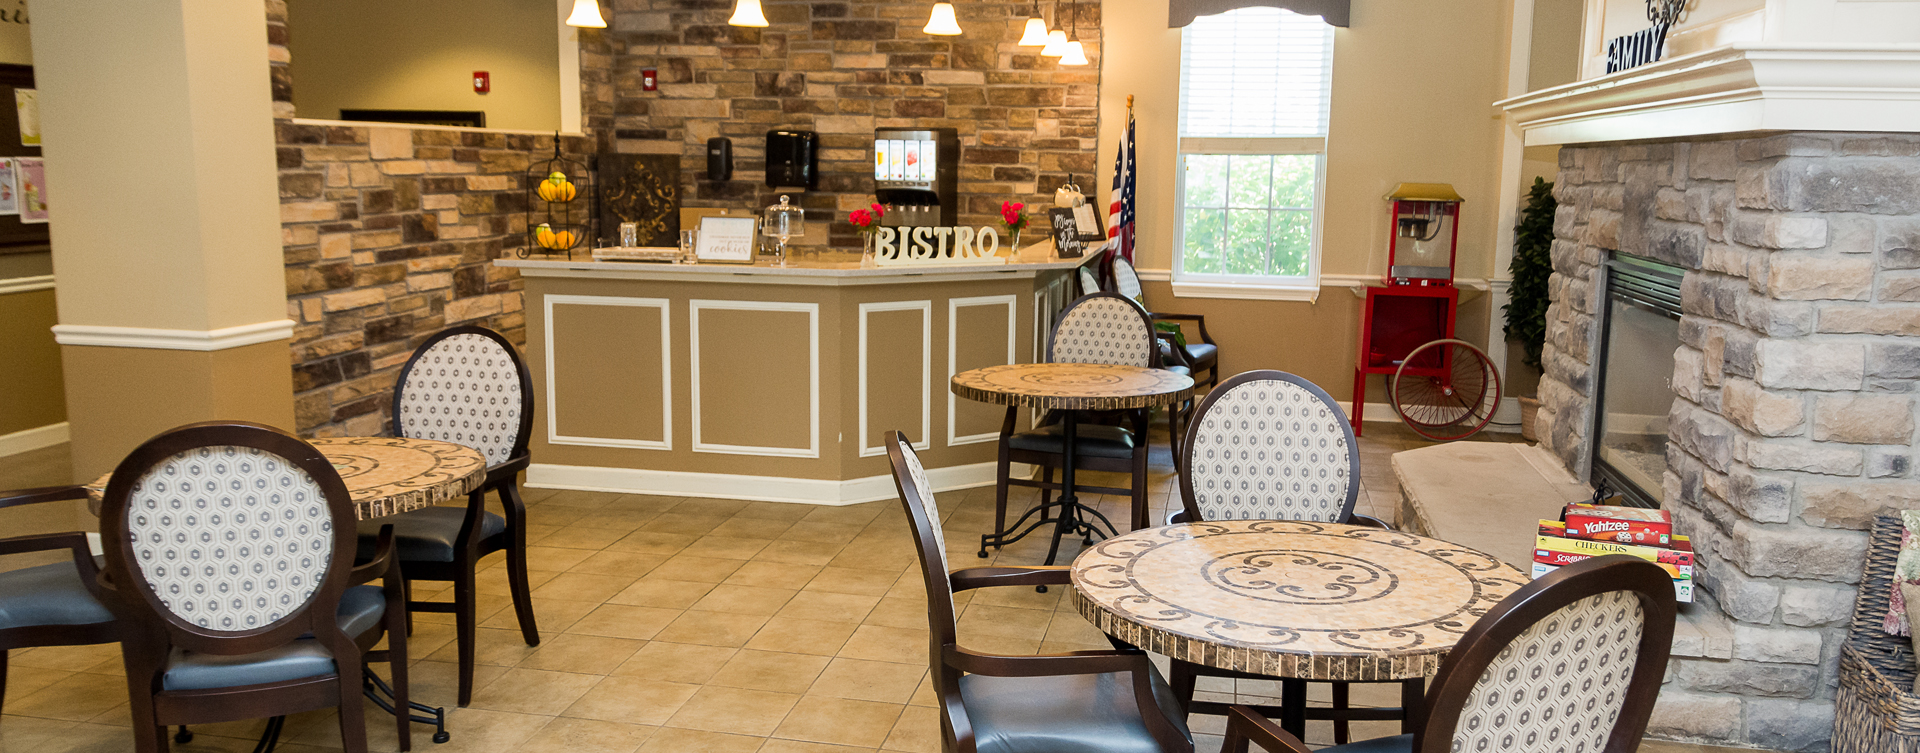 Mingle and converse with old and new friends alike in the bistro at Bickford of Oswego